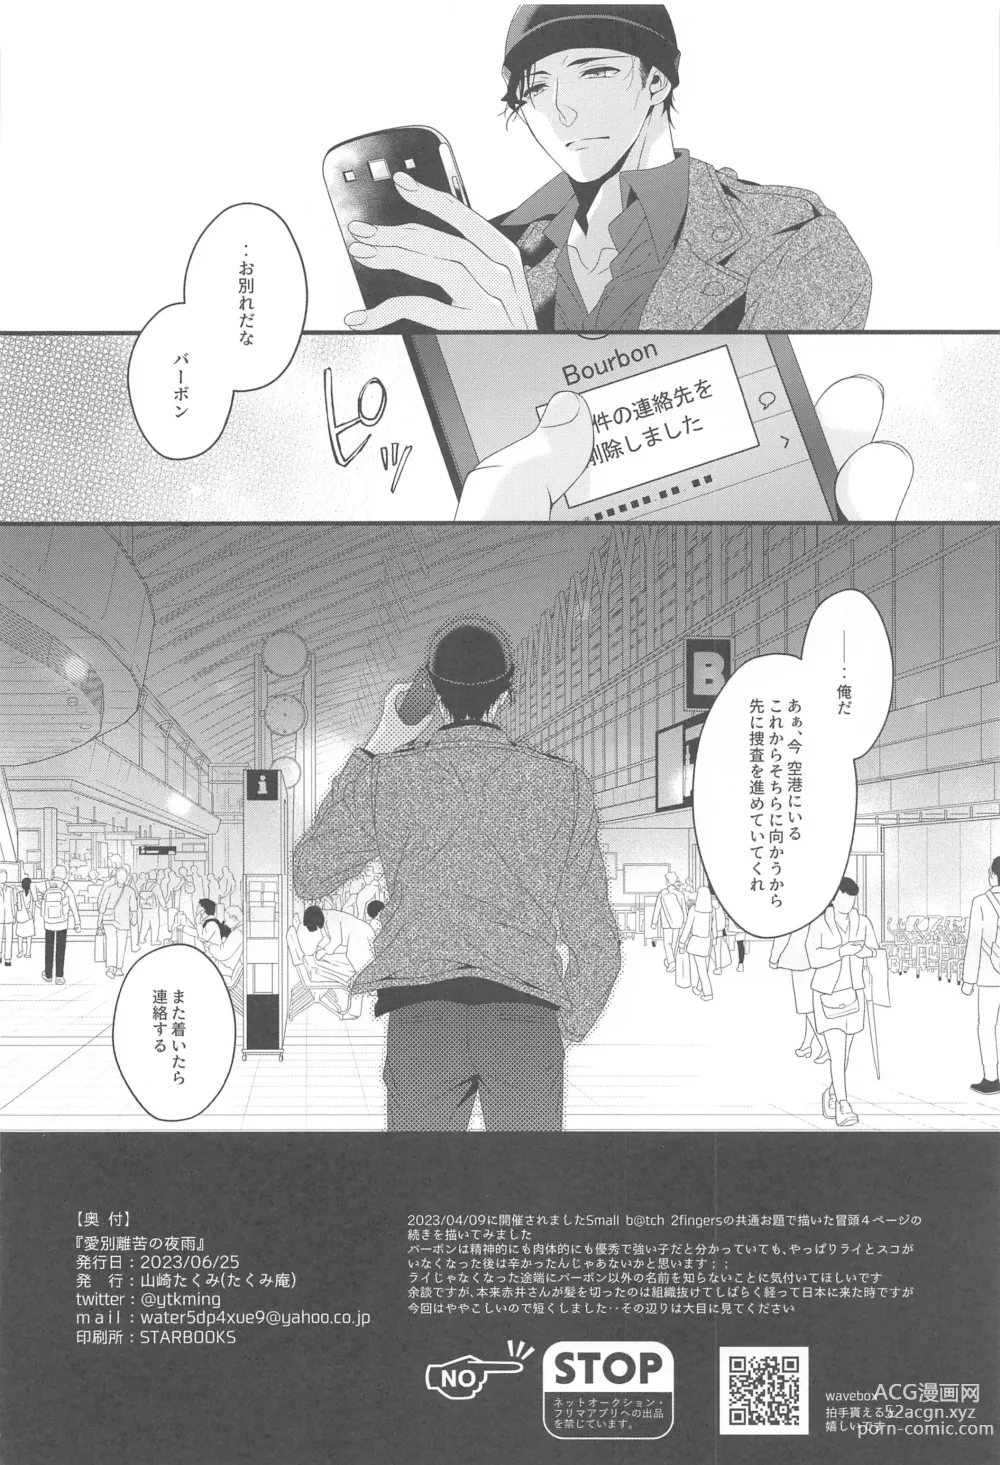 Page 27 of doujinshi Aibetsuriku no Yosame - A rainy night the pain of separation from loved ones